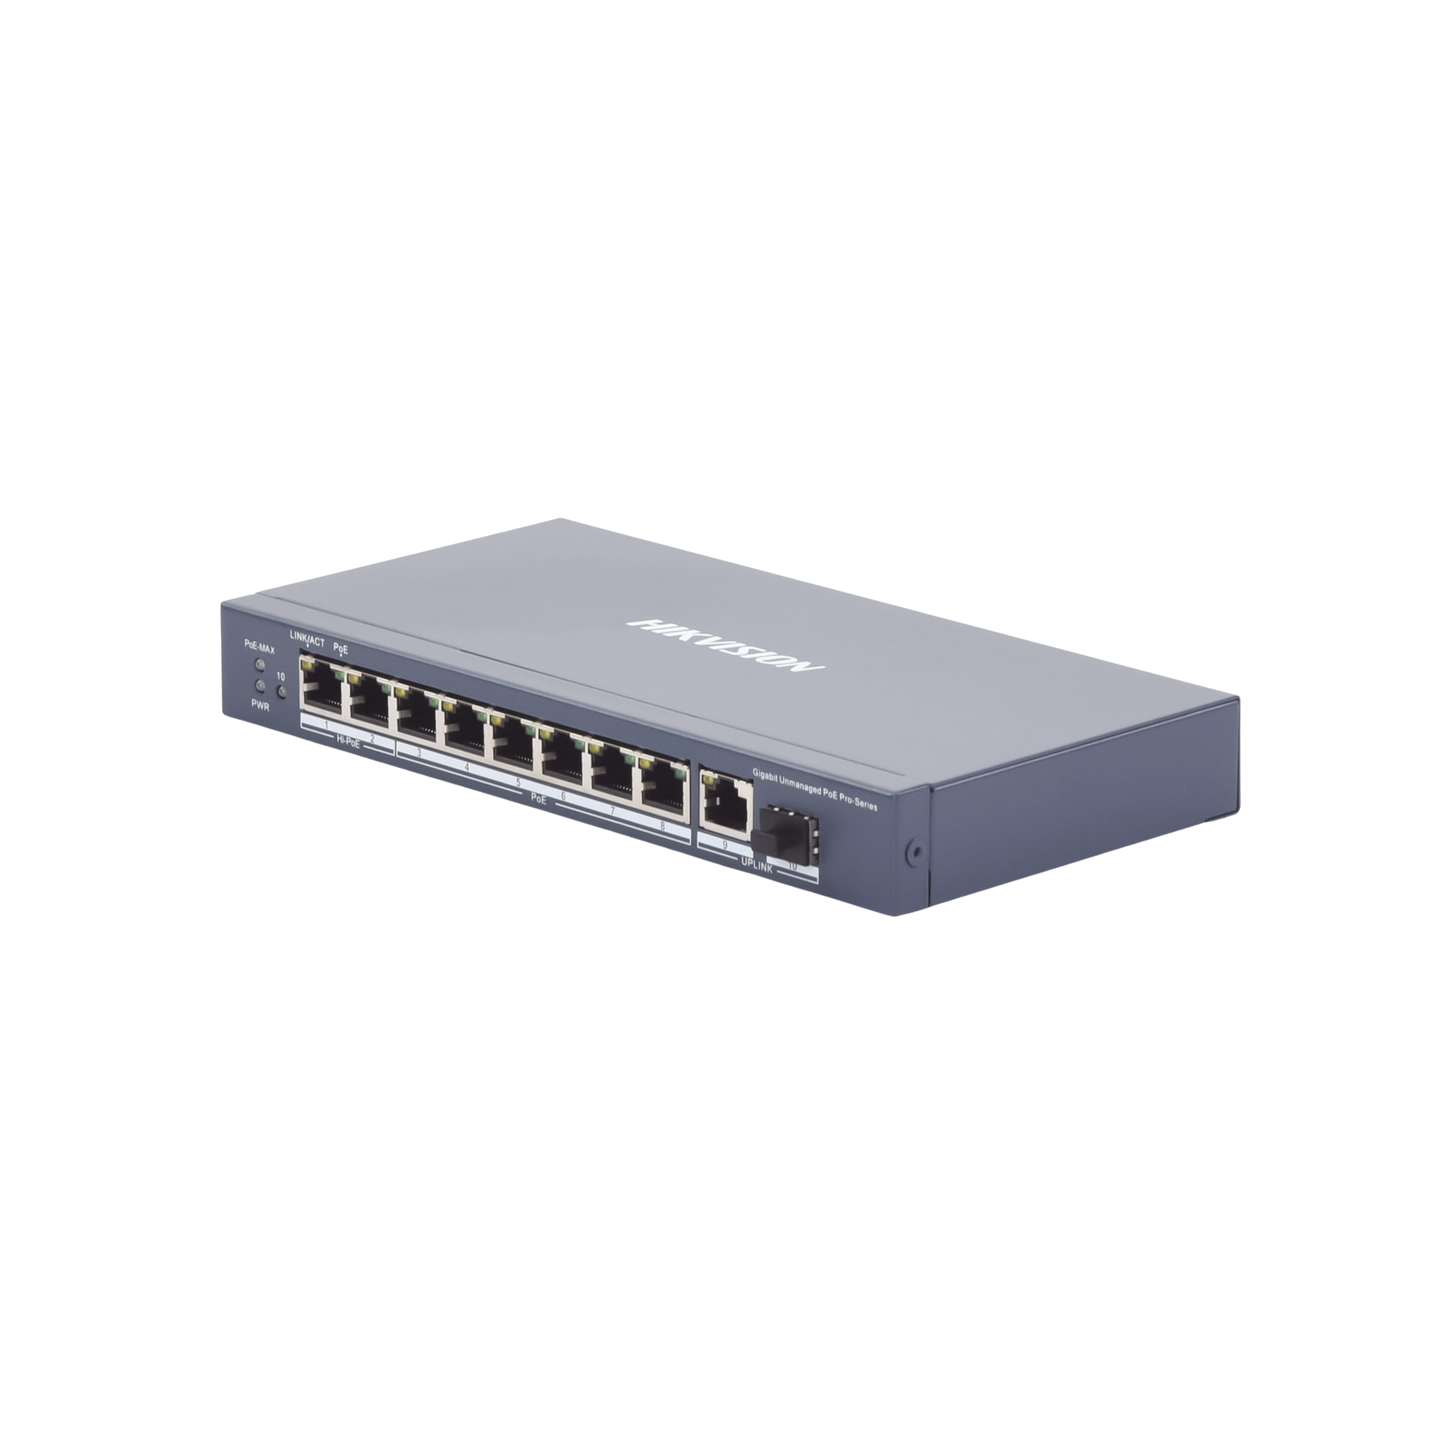 Switch PoE+ / No Administrable / 6 Puertos 10/100 Mbps PoE+ / 2 Puertos 10/100 PoE++(90 W) / 1 Puerto 10/100/1000 Uplink + 1 puerto SFP / PoE hasta 250 metros /  110 W